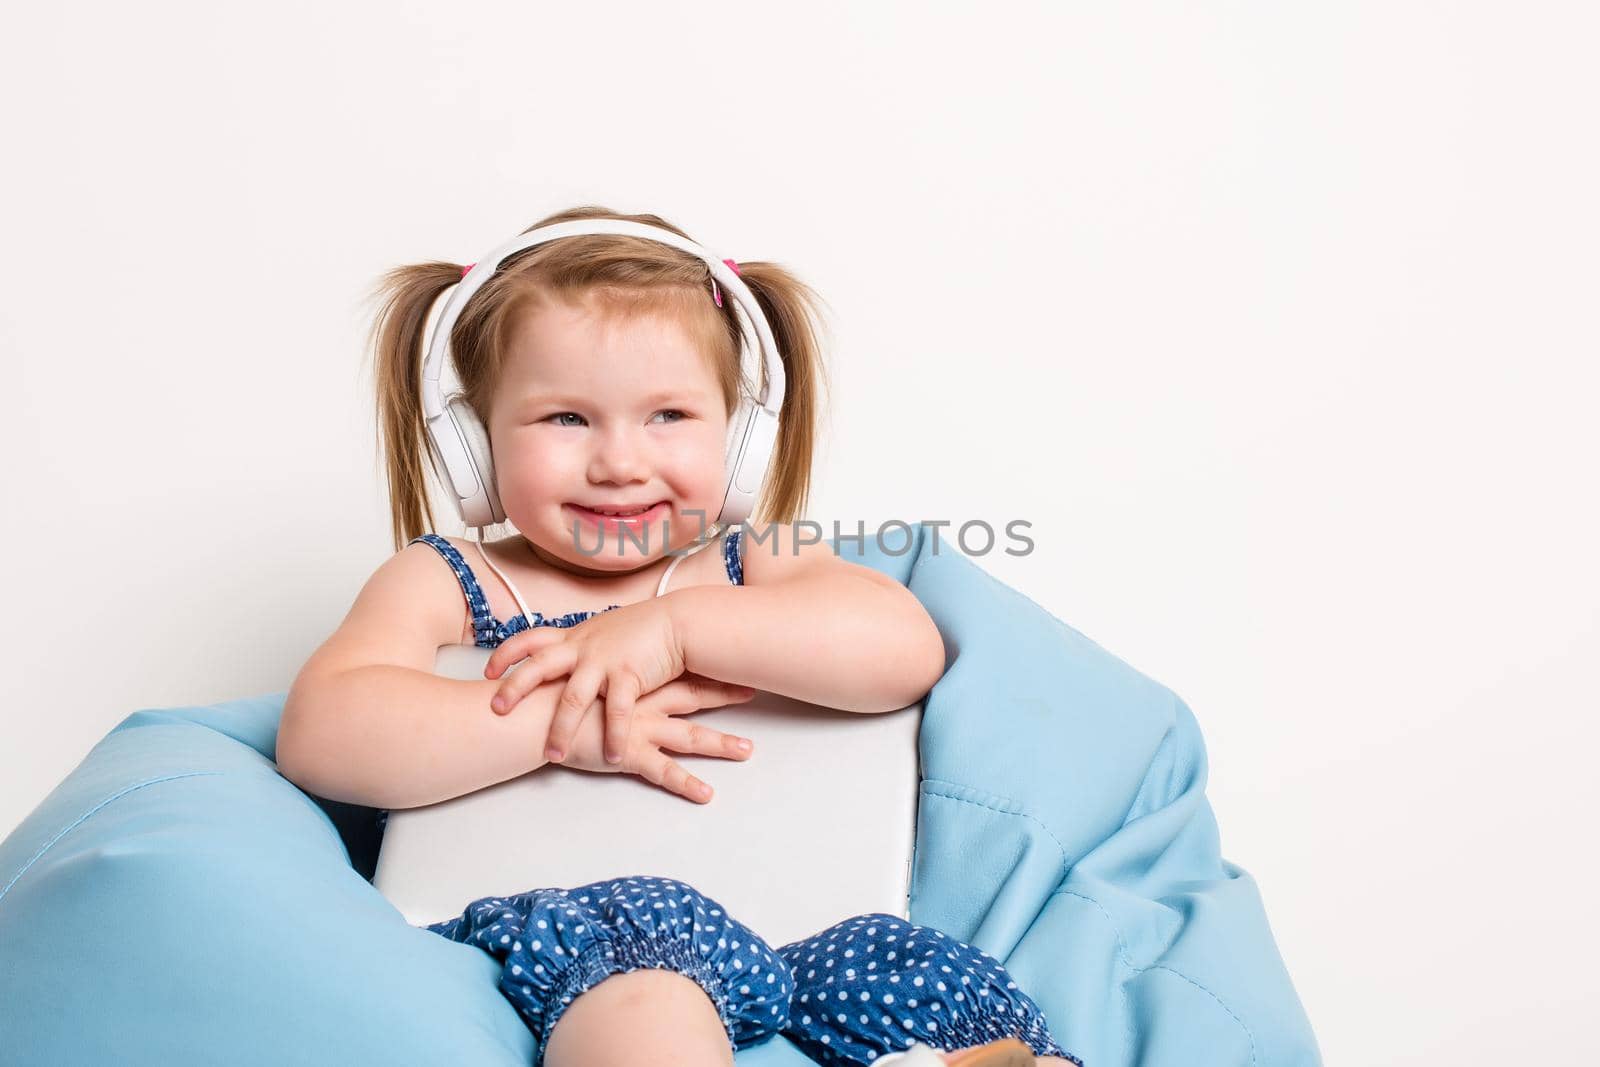 Cute little girl in headphones listening to music using a tablet and smiling while sitting on blue big bag by nazarovsergey